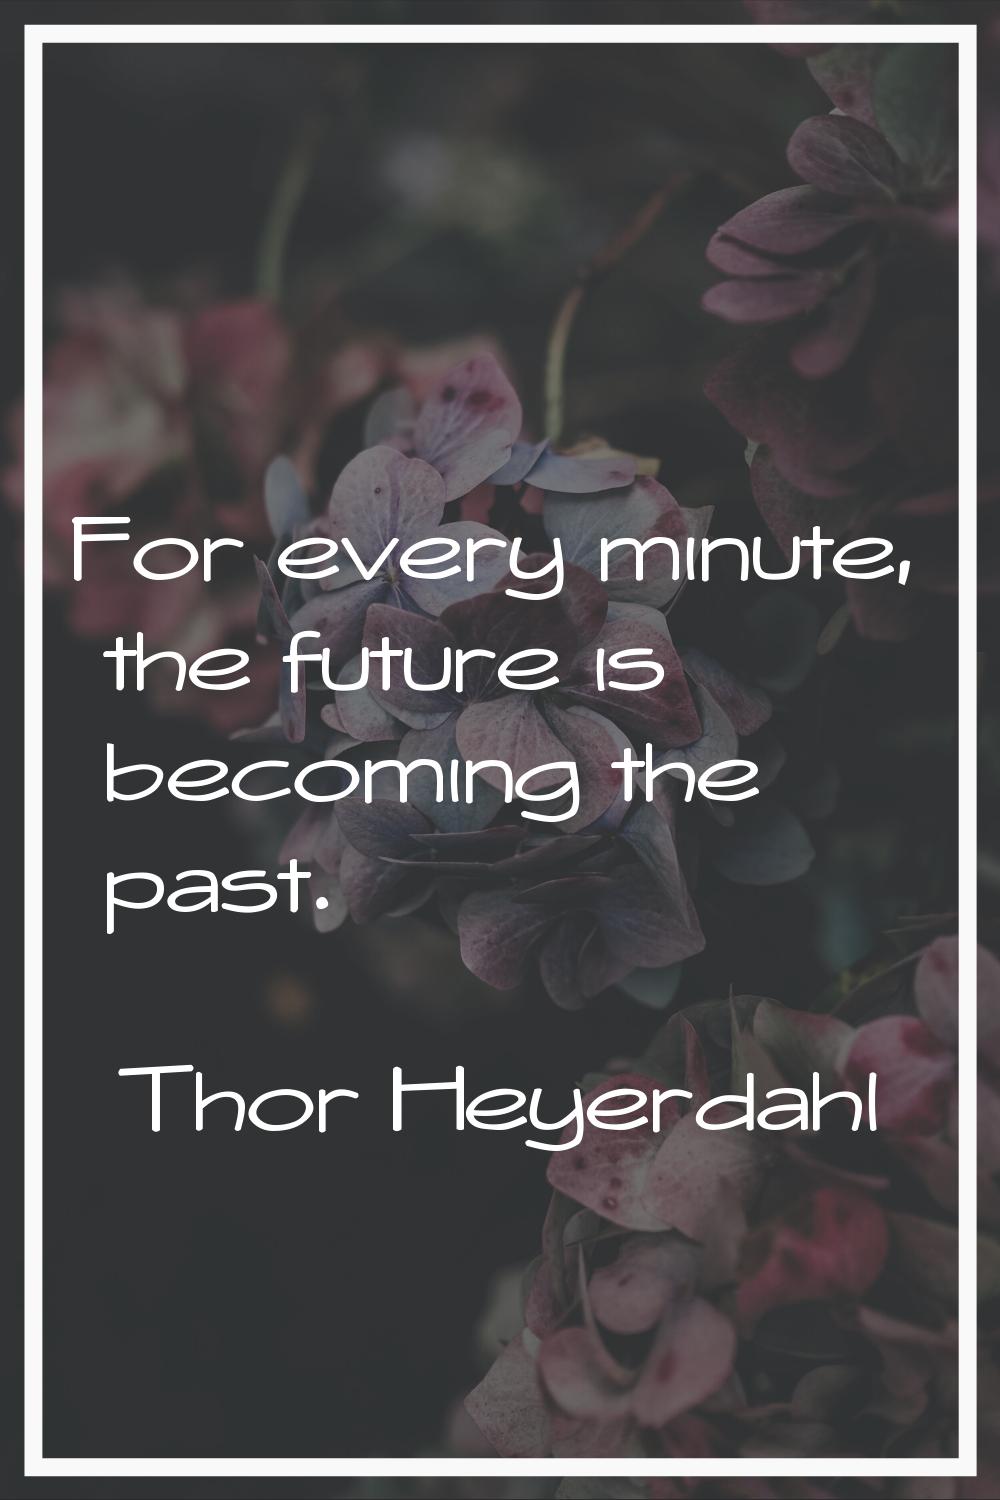 For every minute, the future is becoming the past.